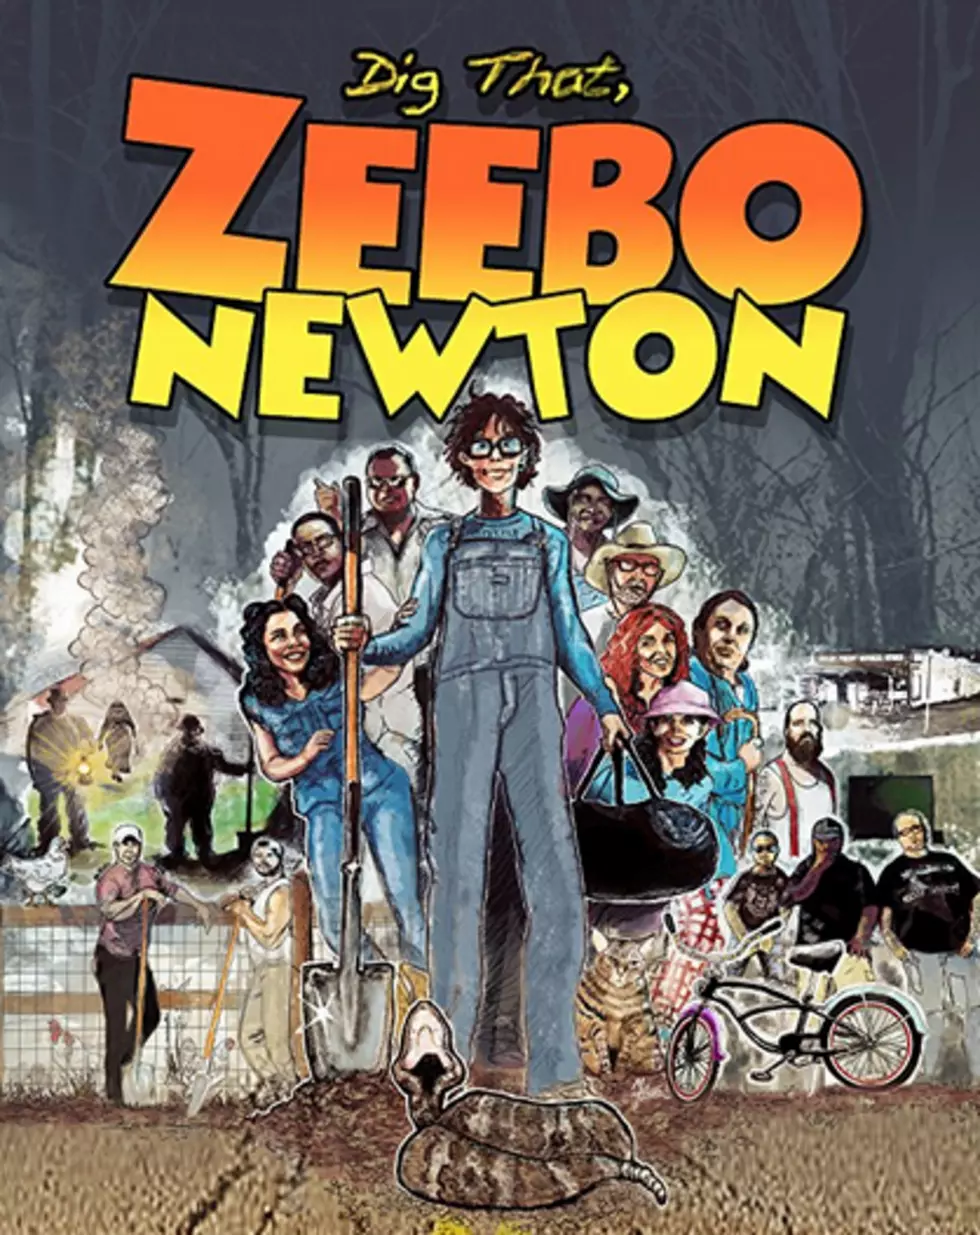 You’ll Want To Check Out The New Flick ‘Dig That, Zeebo Newton’